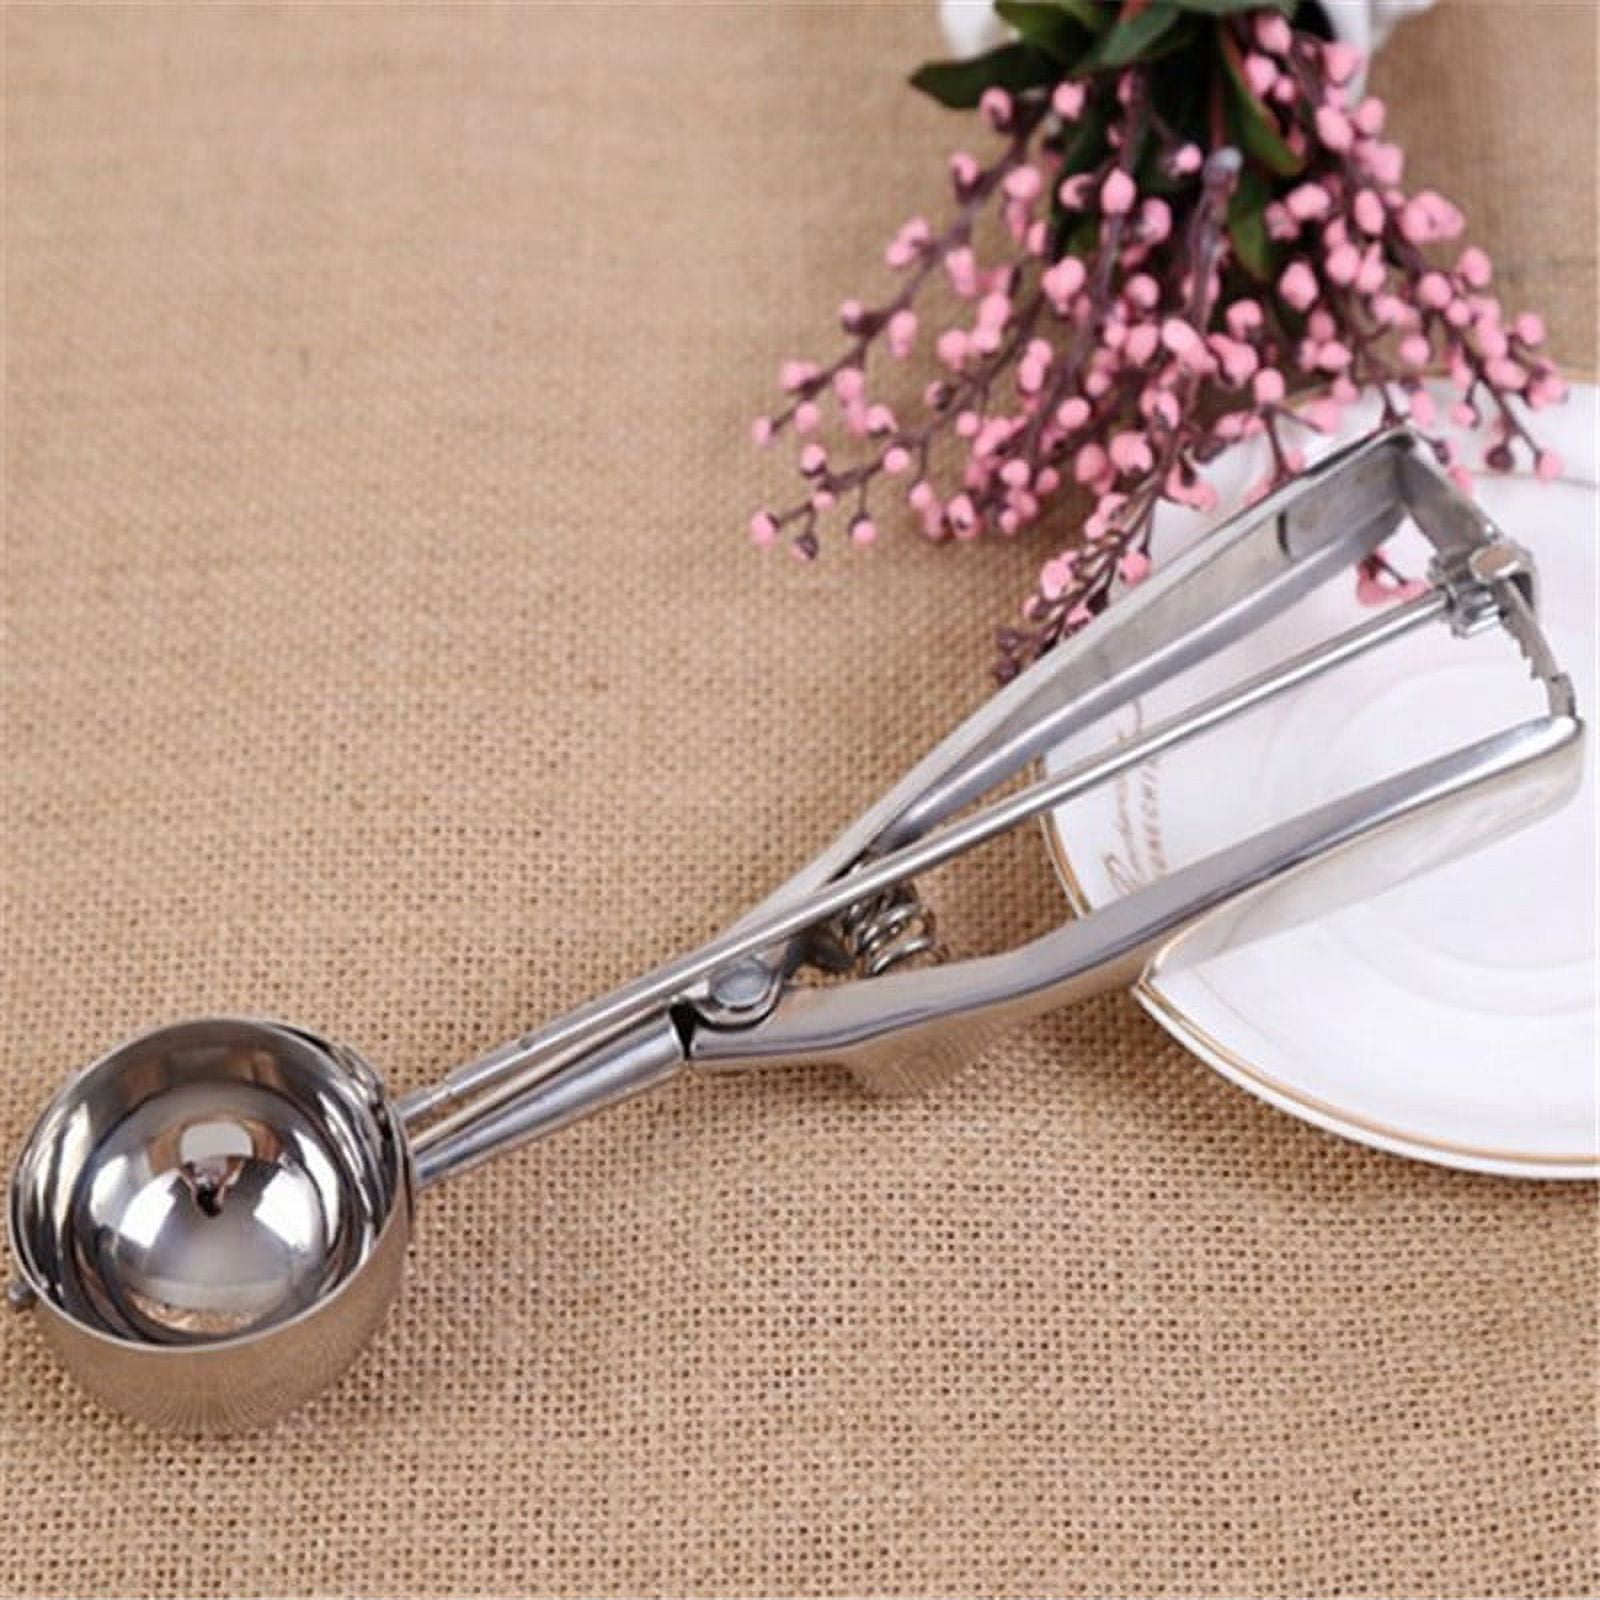 Cookie Scoop with Trigger, 1PC Large Ice Cream Scoop with Squeeze Trigger  Cookie Dough Scooper Cupcake Muffin Batter Meat Ball Dispenser Melon Baller  Food-grade 18/8 Stainless Steel 